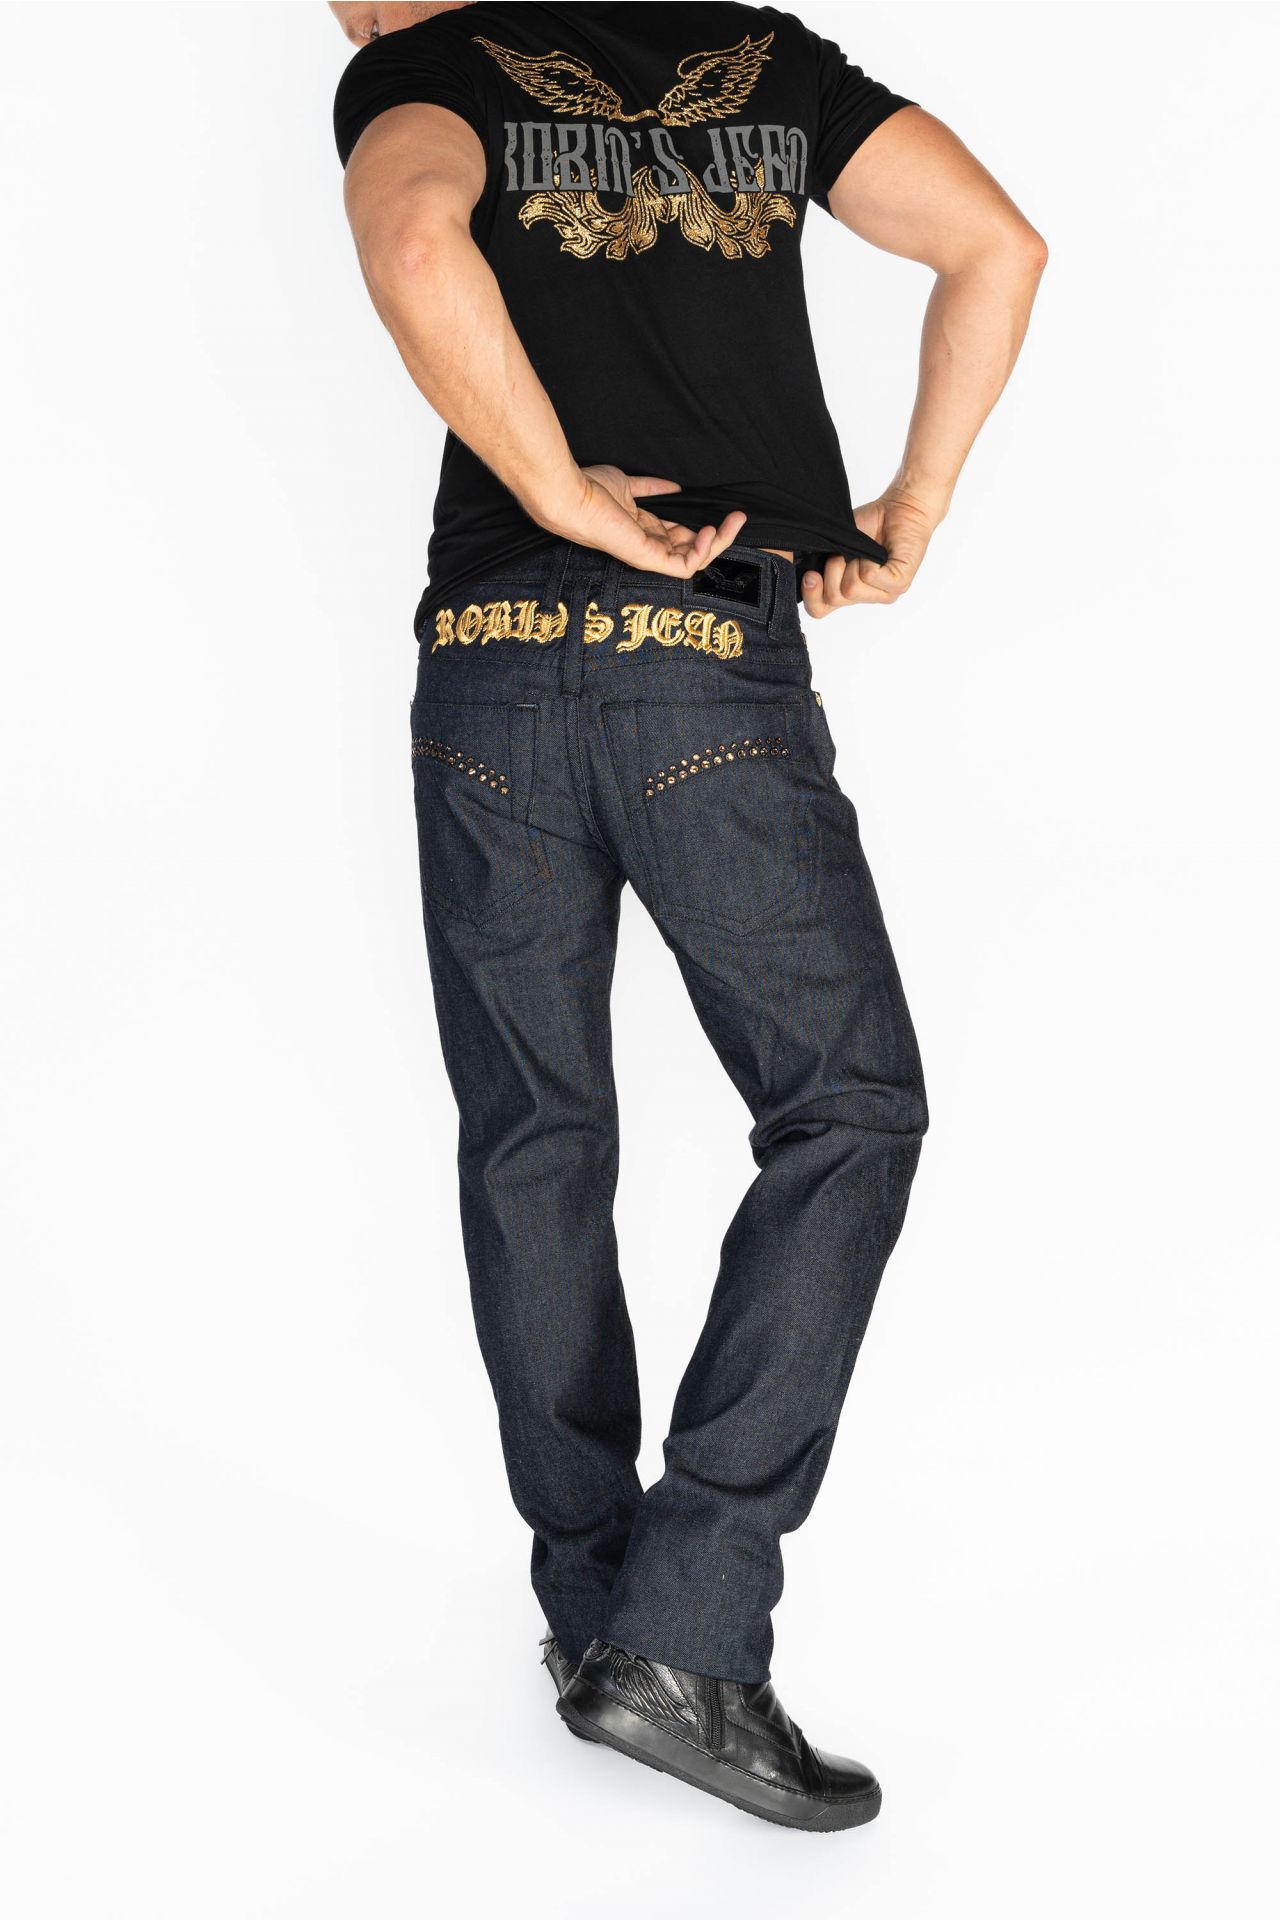 MENS RAW DENIM SLIM FIT JEANS WITH O.E. GOLD EMBROIDERY AND CRYSTALS